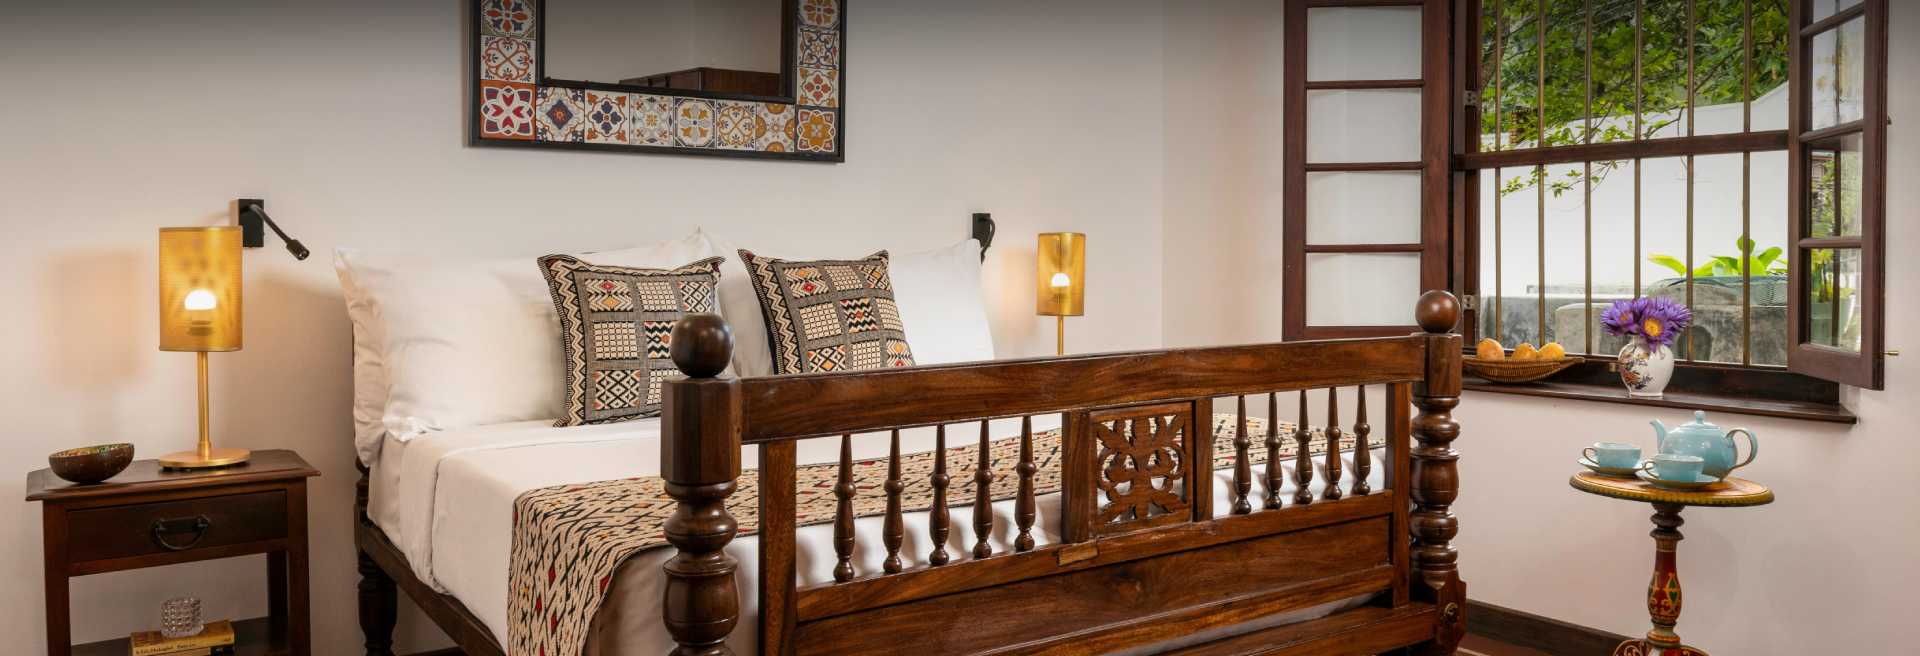 Jetwing-Galle-Heritage-accommodation-Deluxe-Rooms